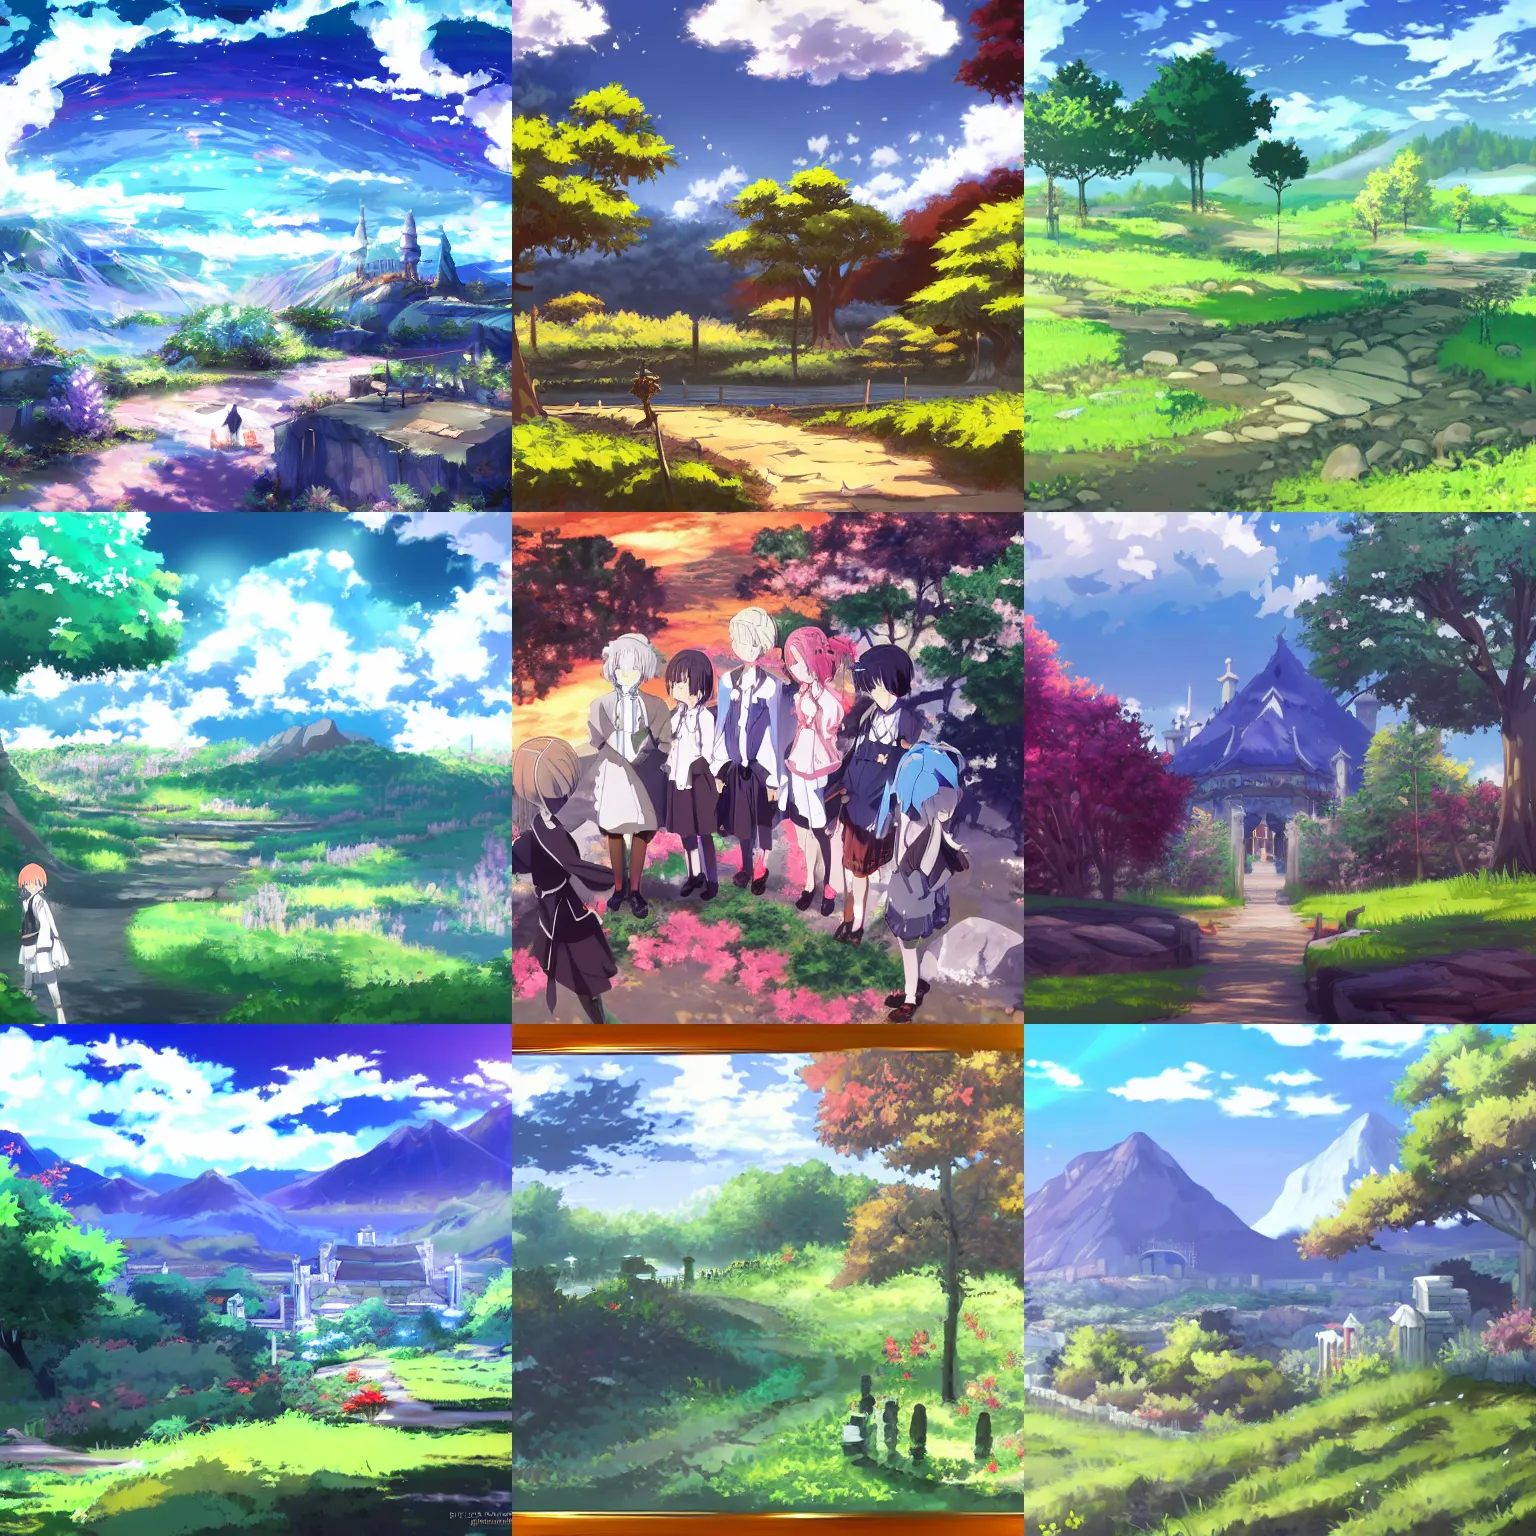 Prompt: a landscape in the style of re : zero